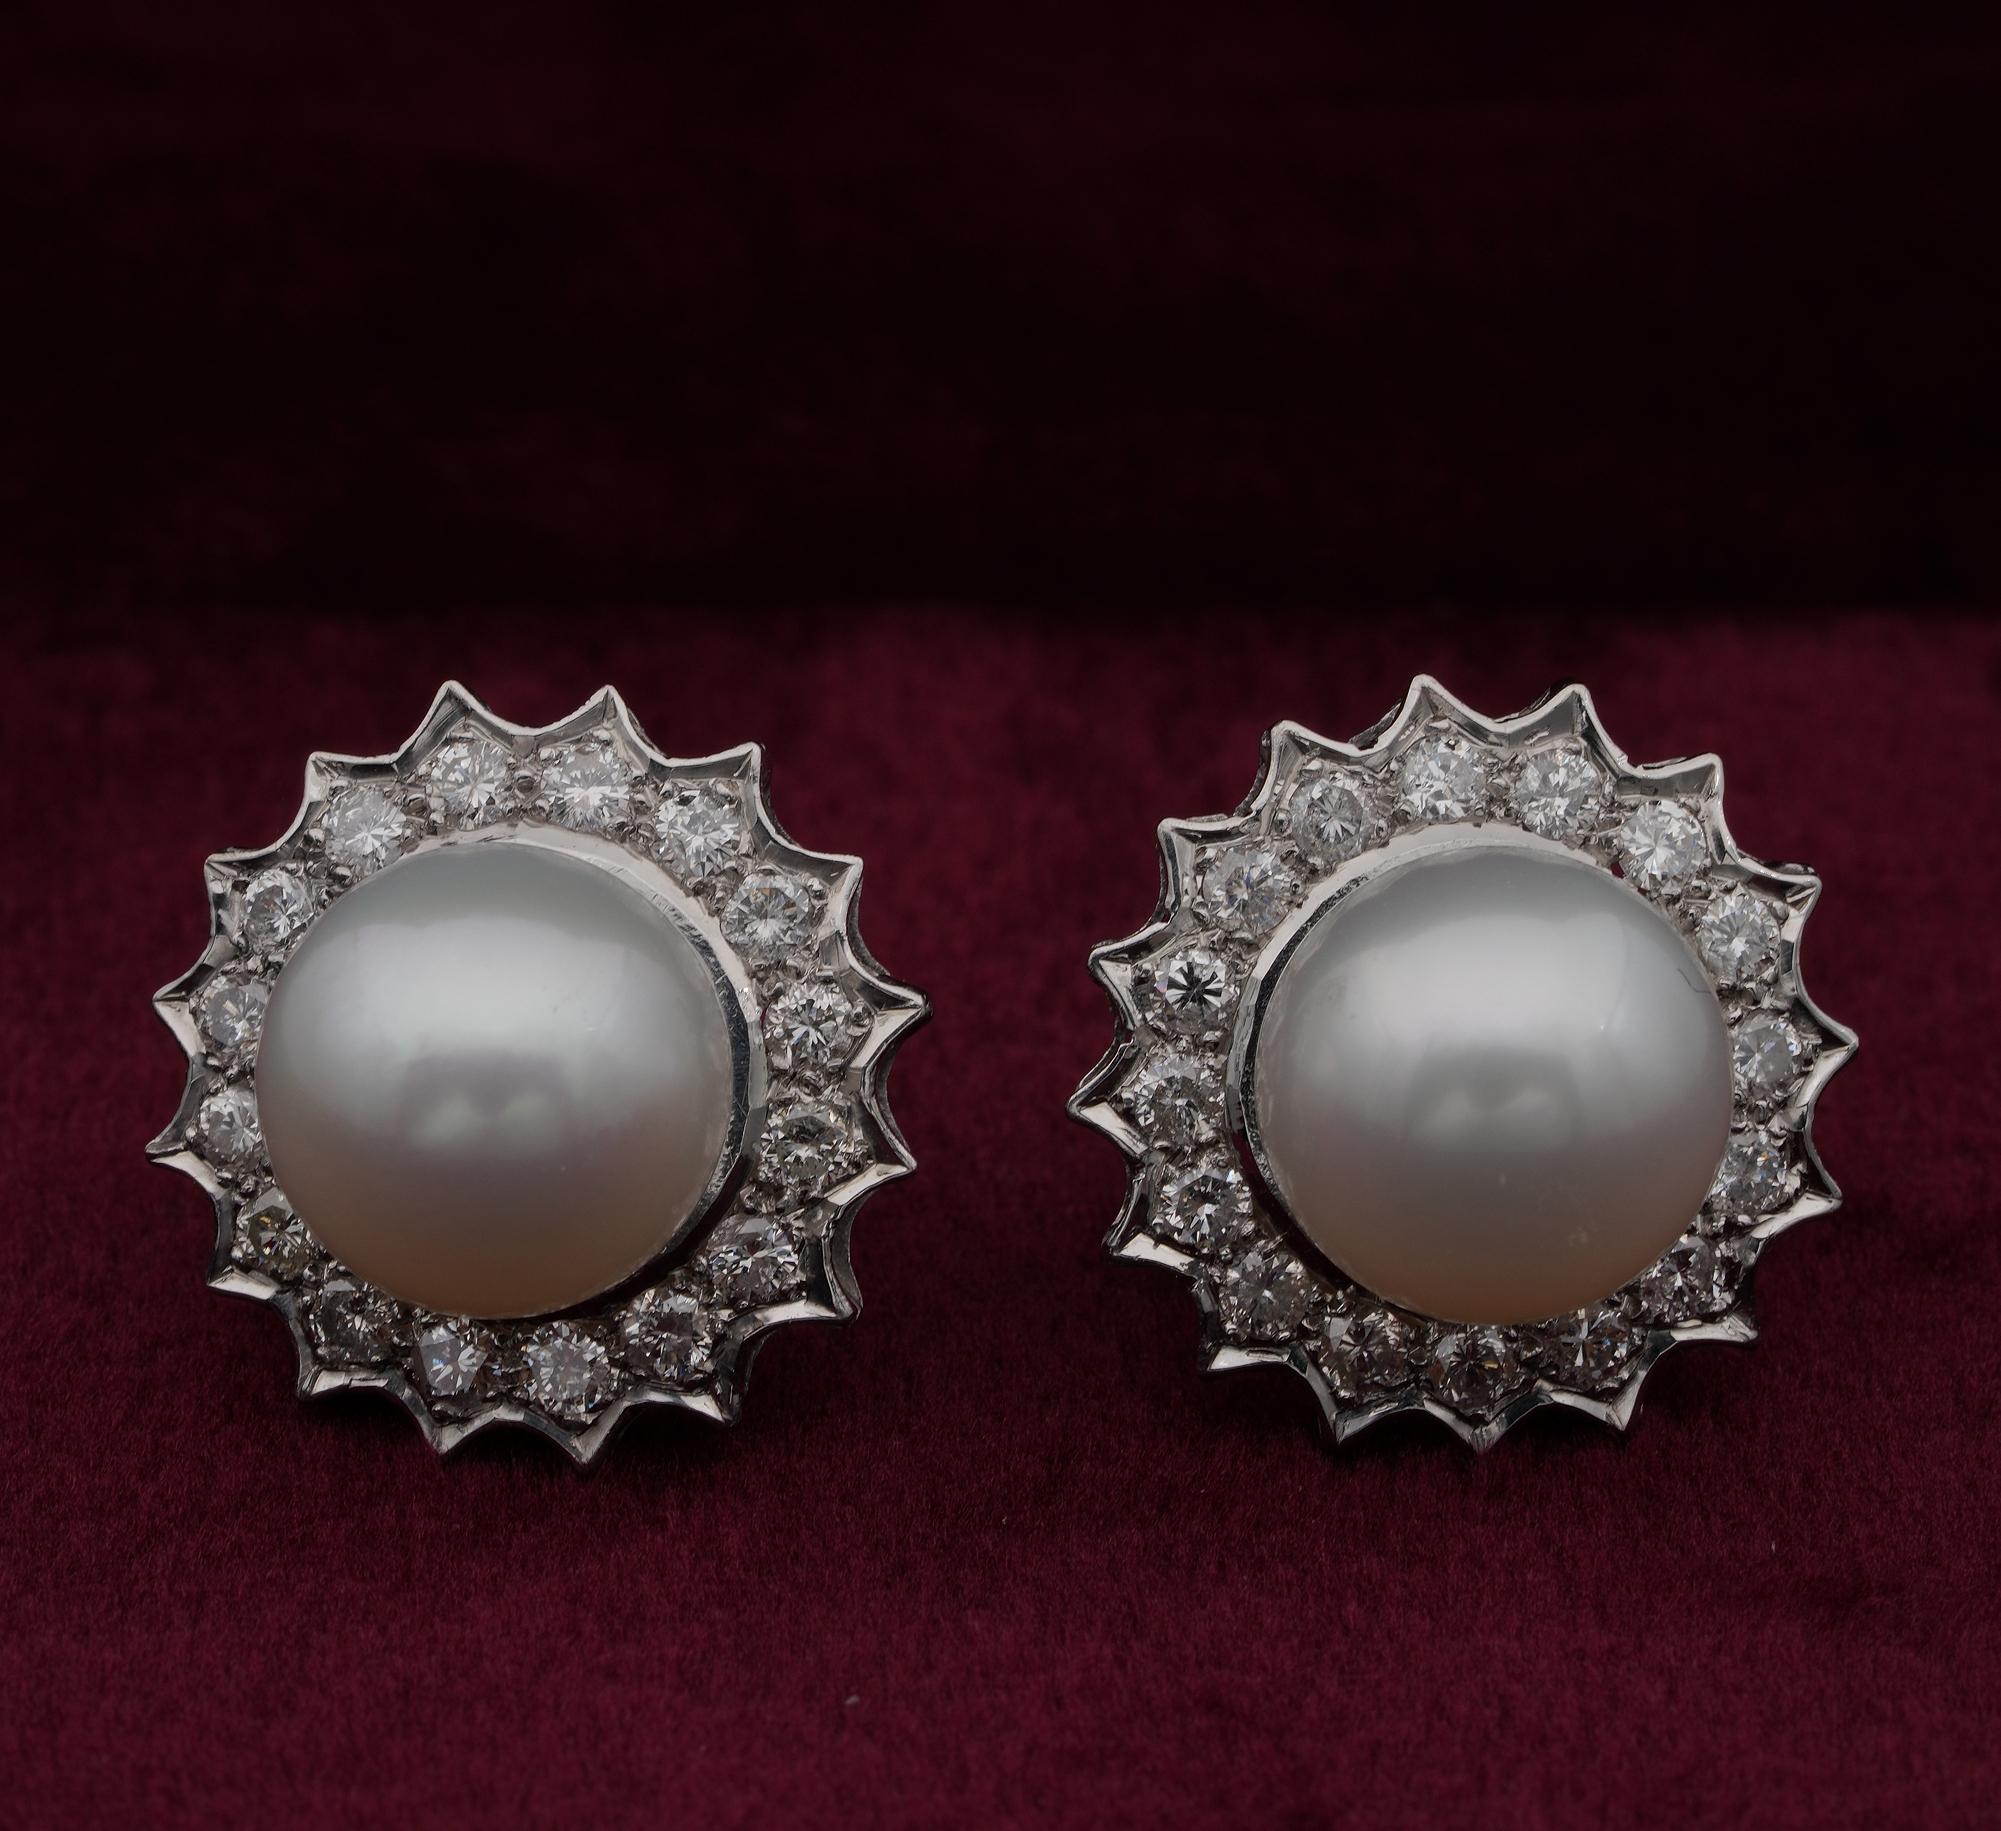 Classy Statement
These gorgeous estate earrings highlight two lovely round South Sea Pearls, flawless and appealing white silvery – 11 mm. in diameter – fine in all, nacre, lustre, shape and blemish free
Making the centre point in a petal like